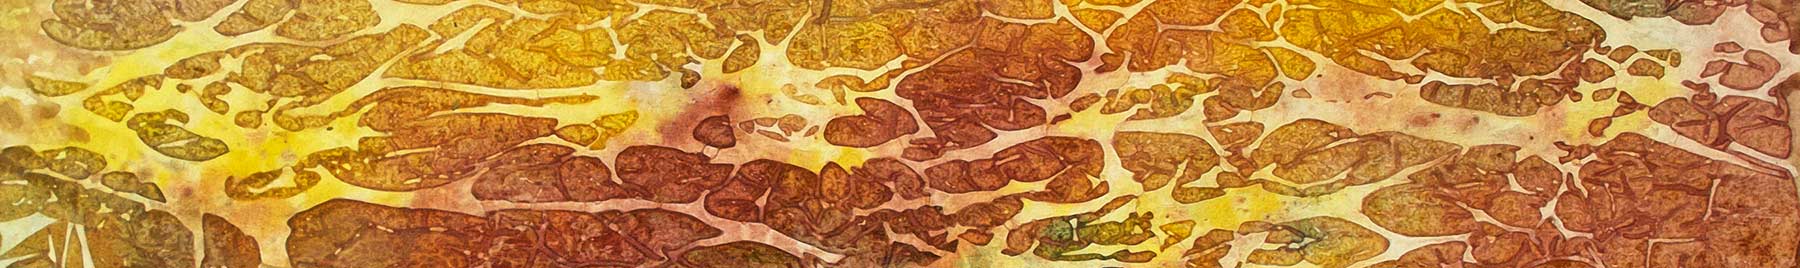 illustration of orange and yellow cracked earth